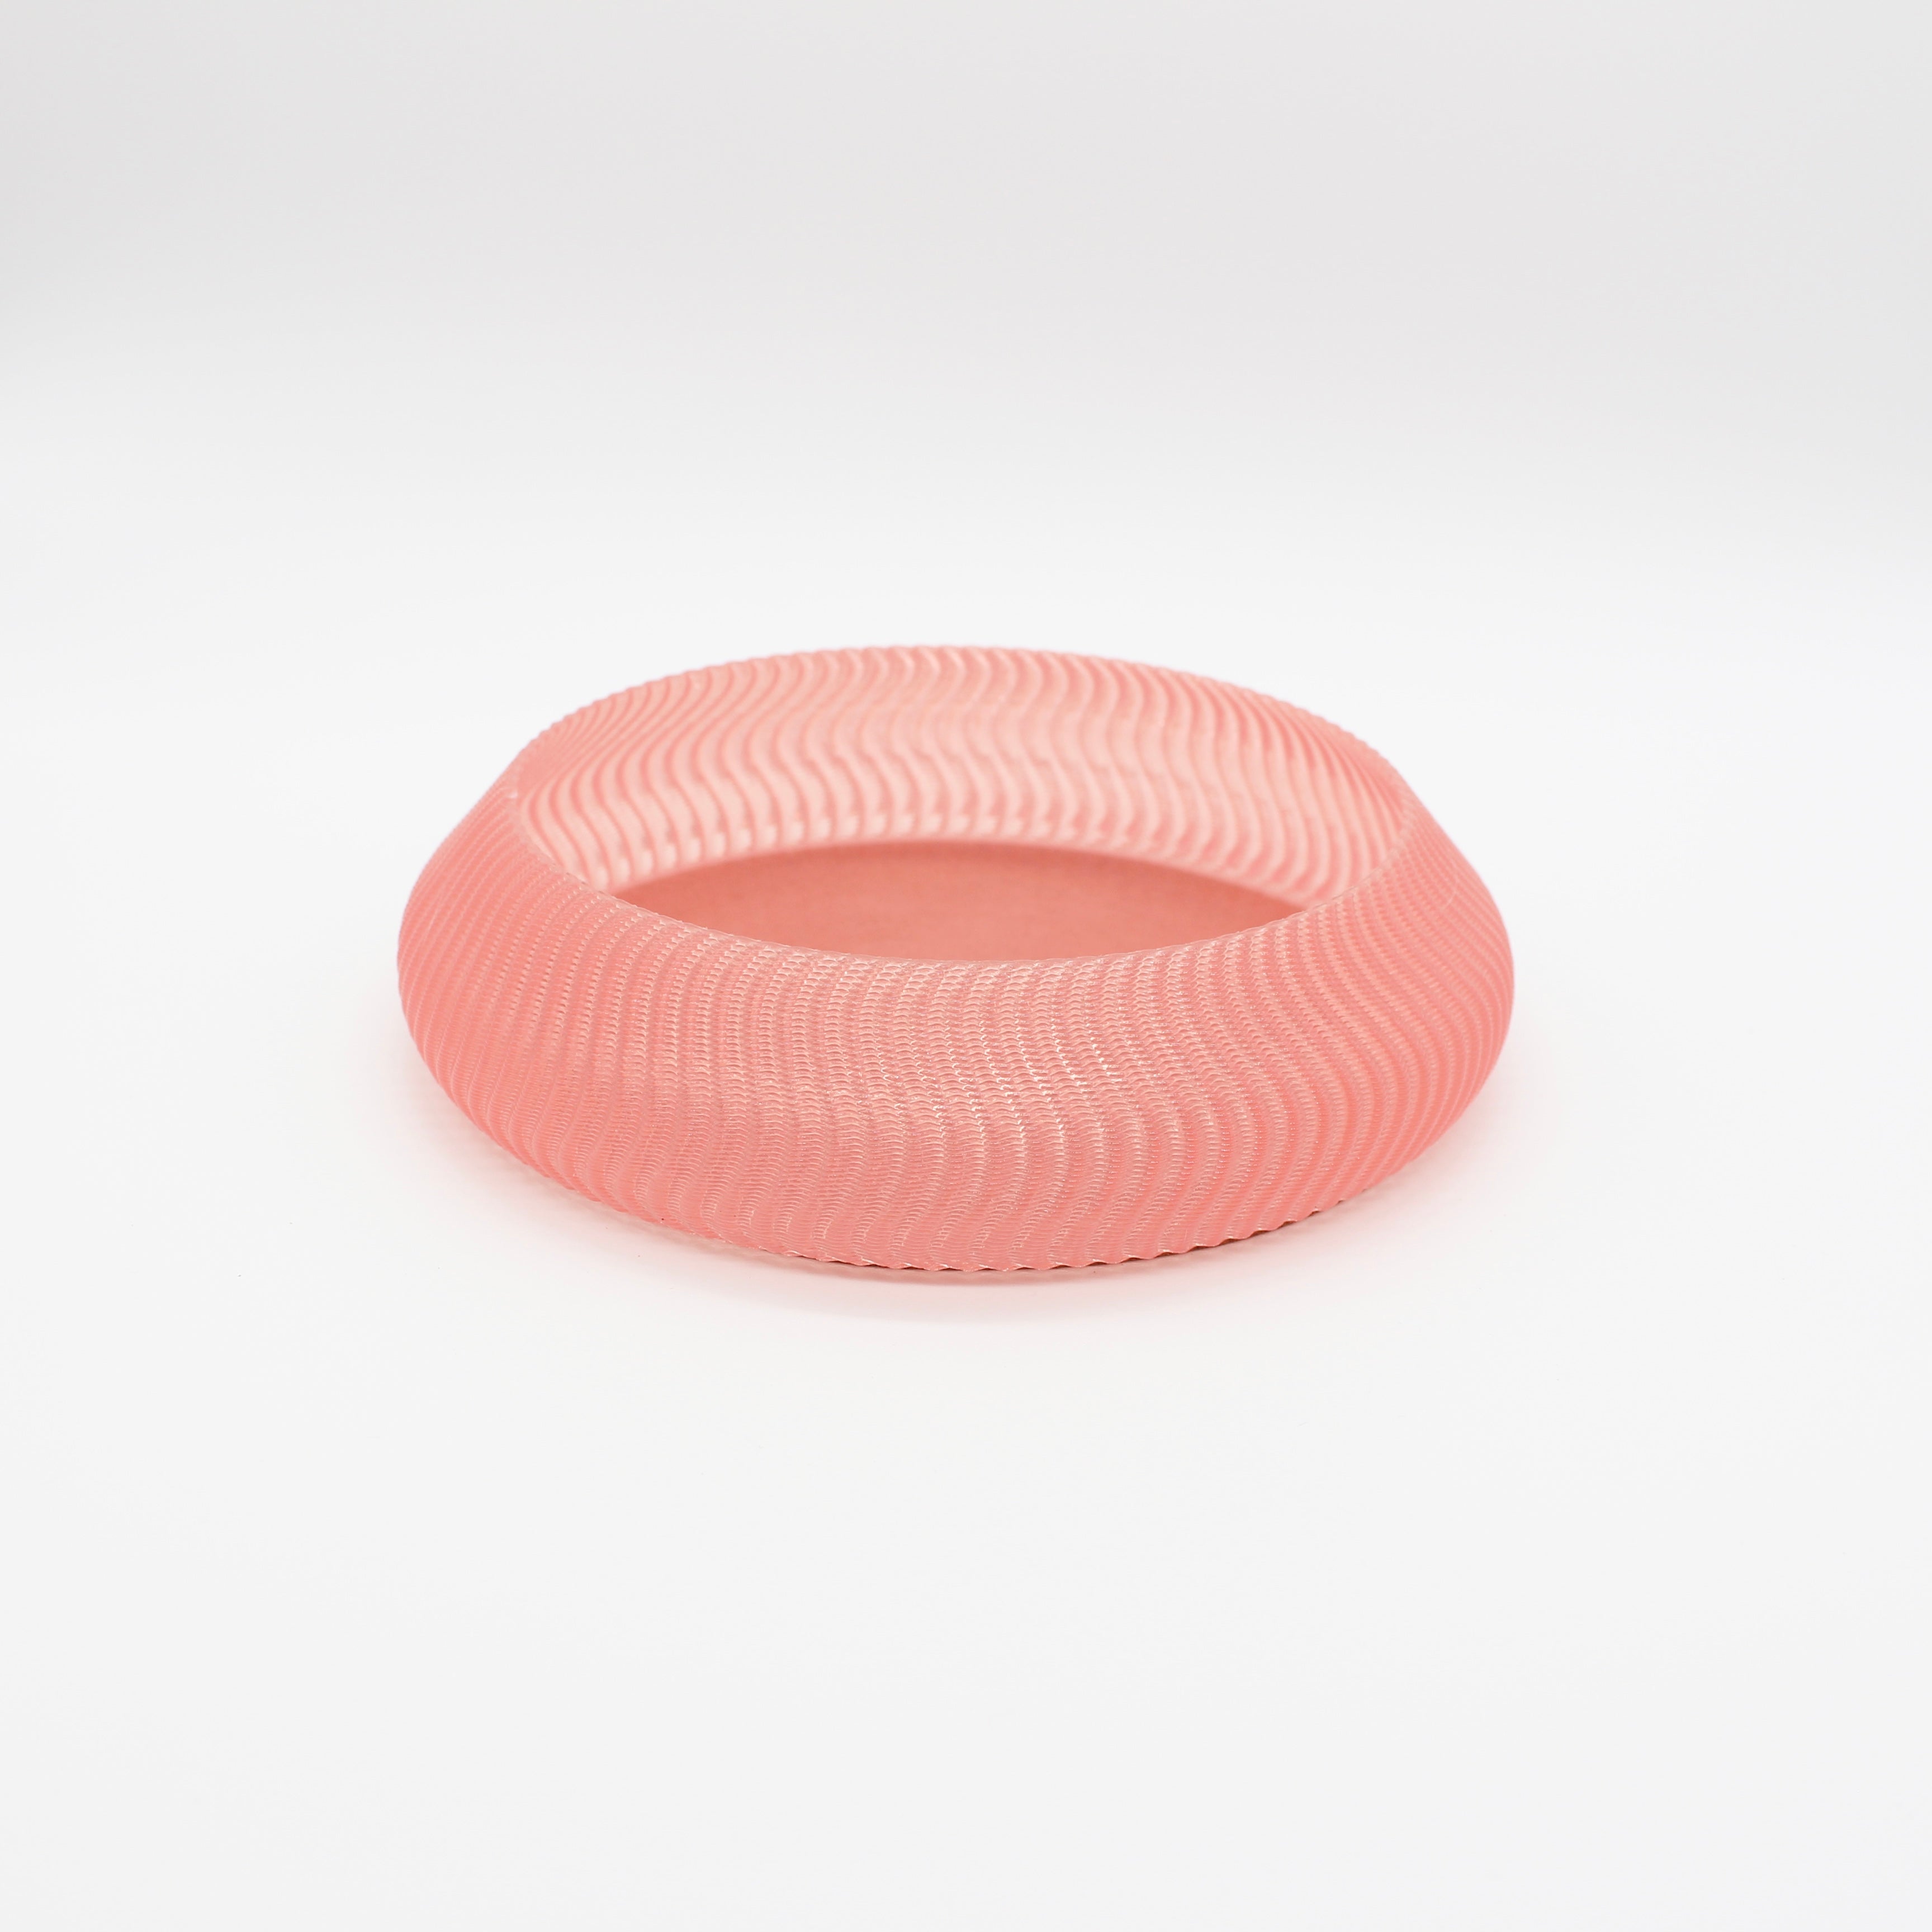 Kyma Shallow Bowl Eggshell, 3D Printed Recycled Plastic, Deme Design #color_peach